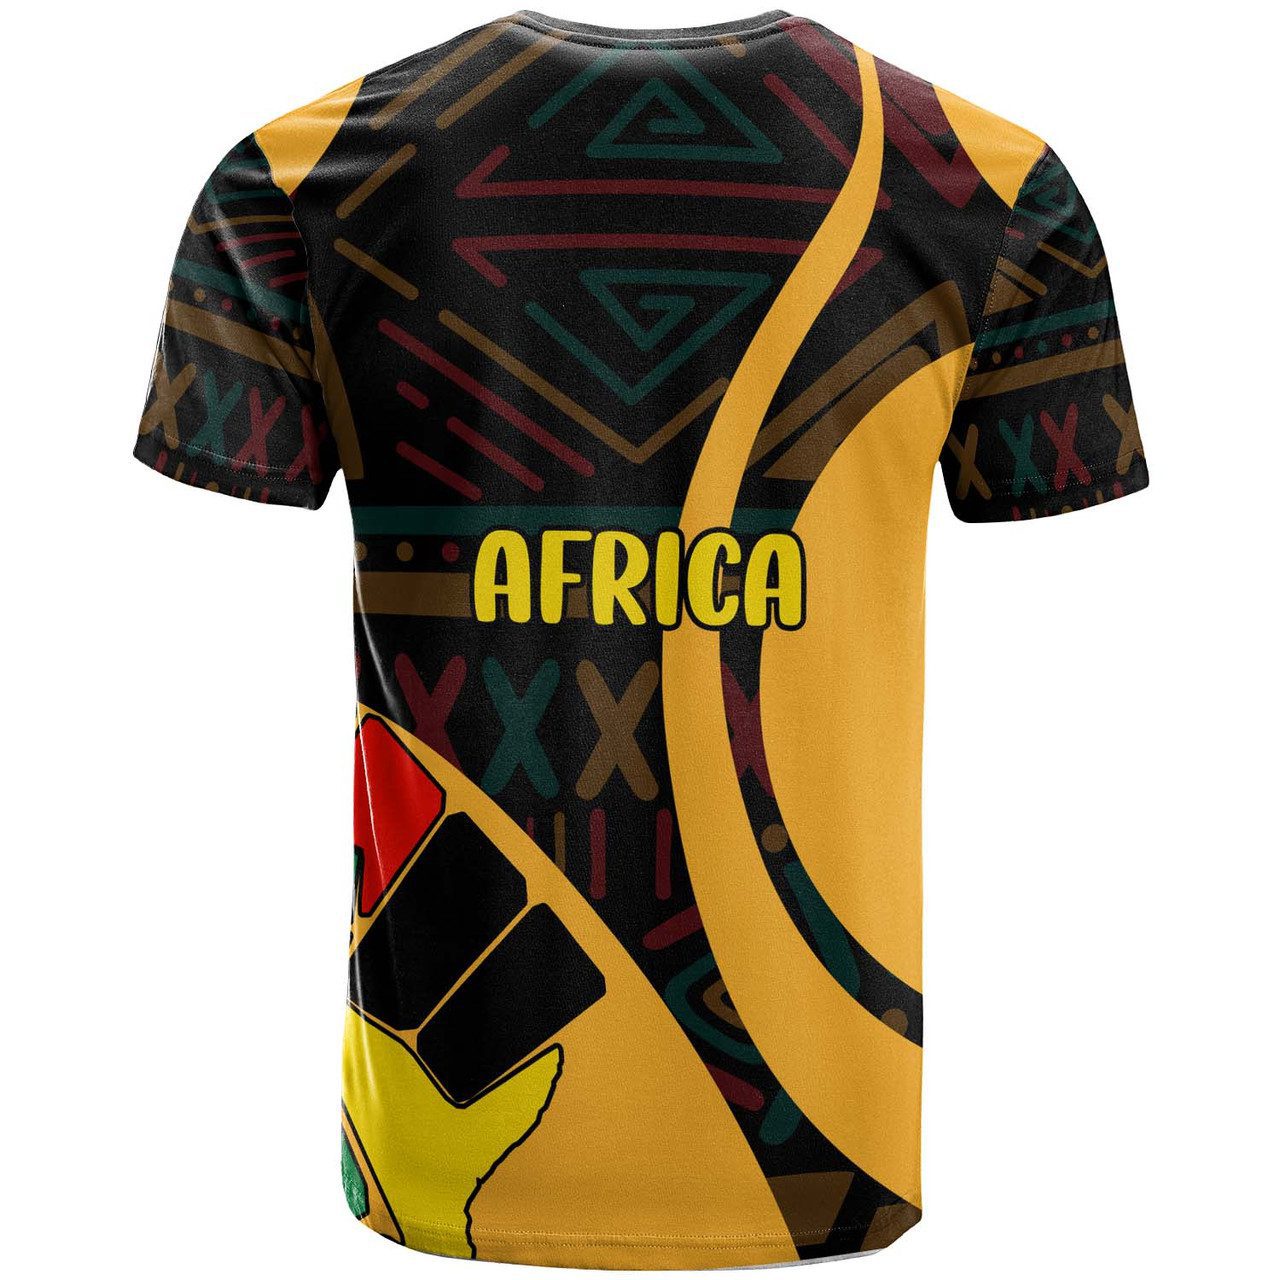 African T-Shirt – Celebrate Africa’s Woman’s Day with Ethnic Patterns T-Shirt